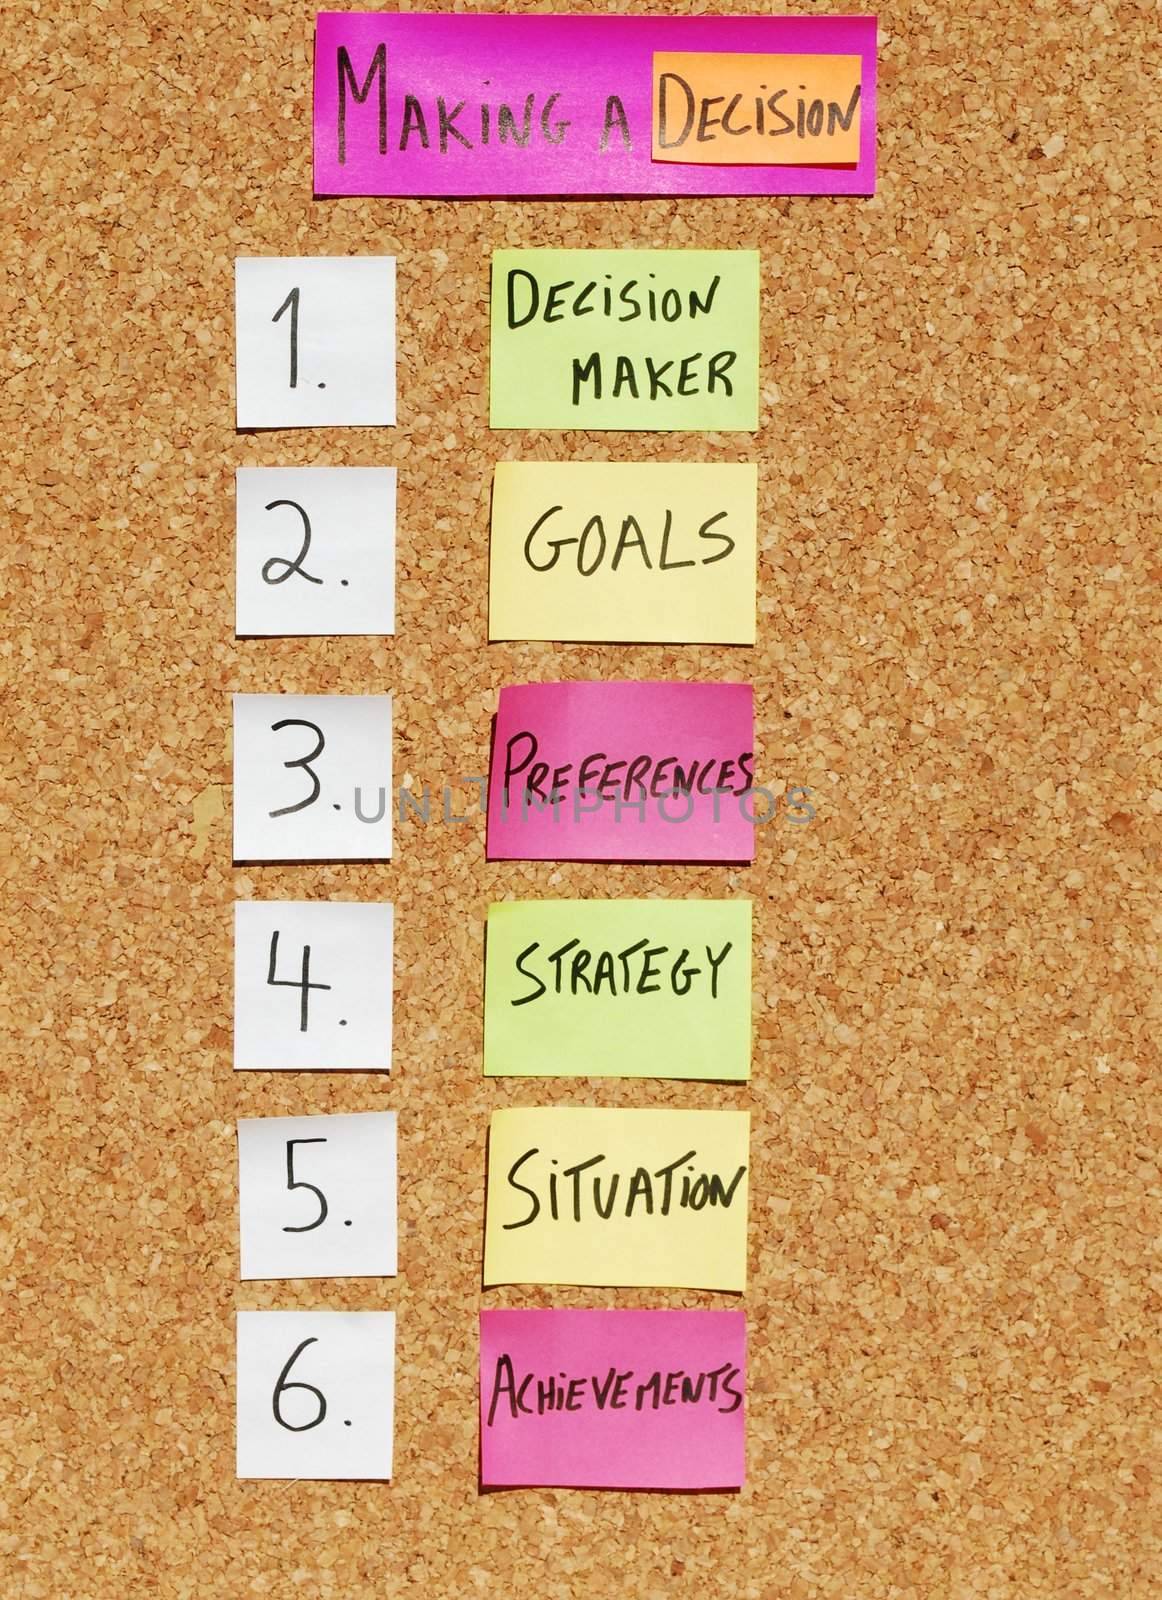 concept of steps to produce a decision on a corkboard with colorful notes